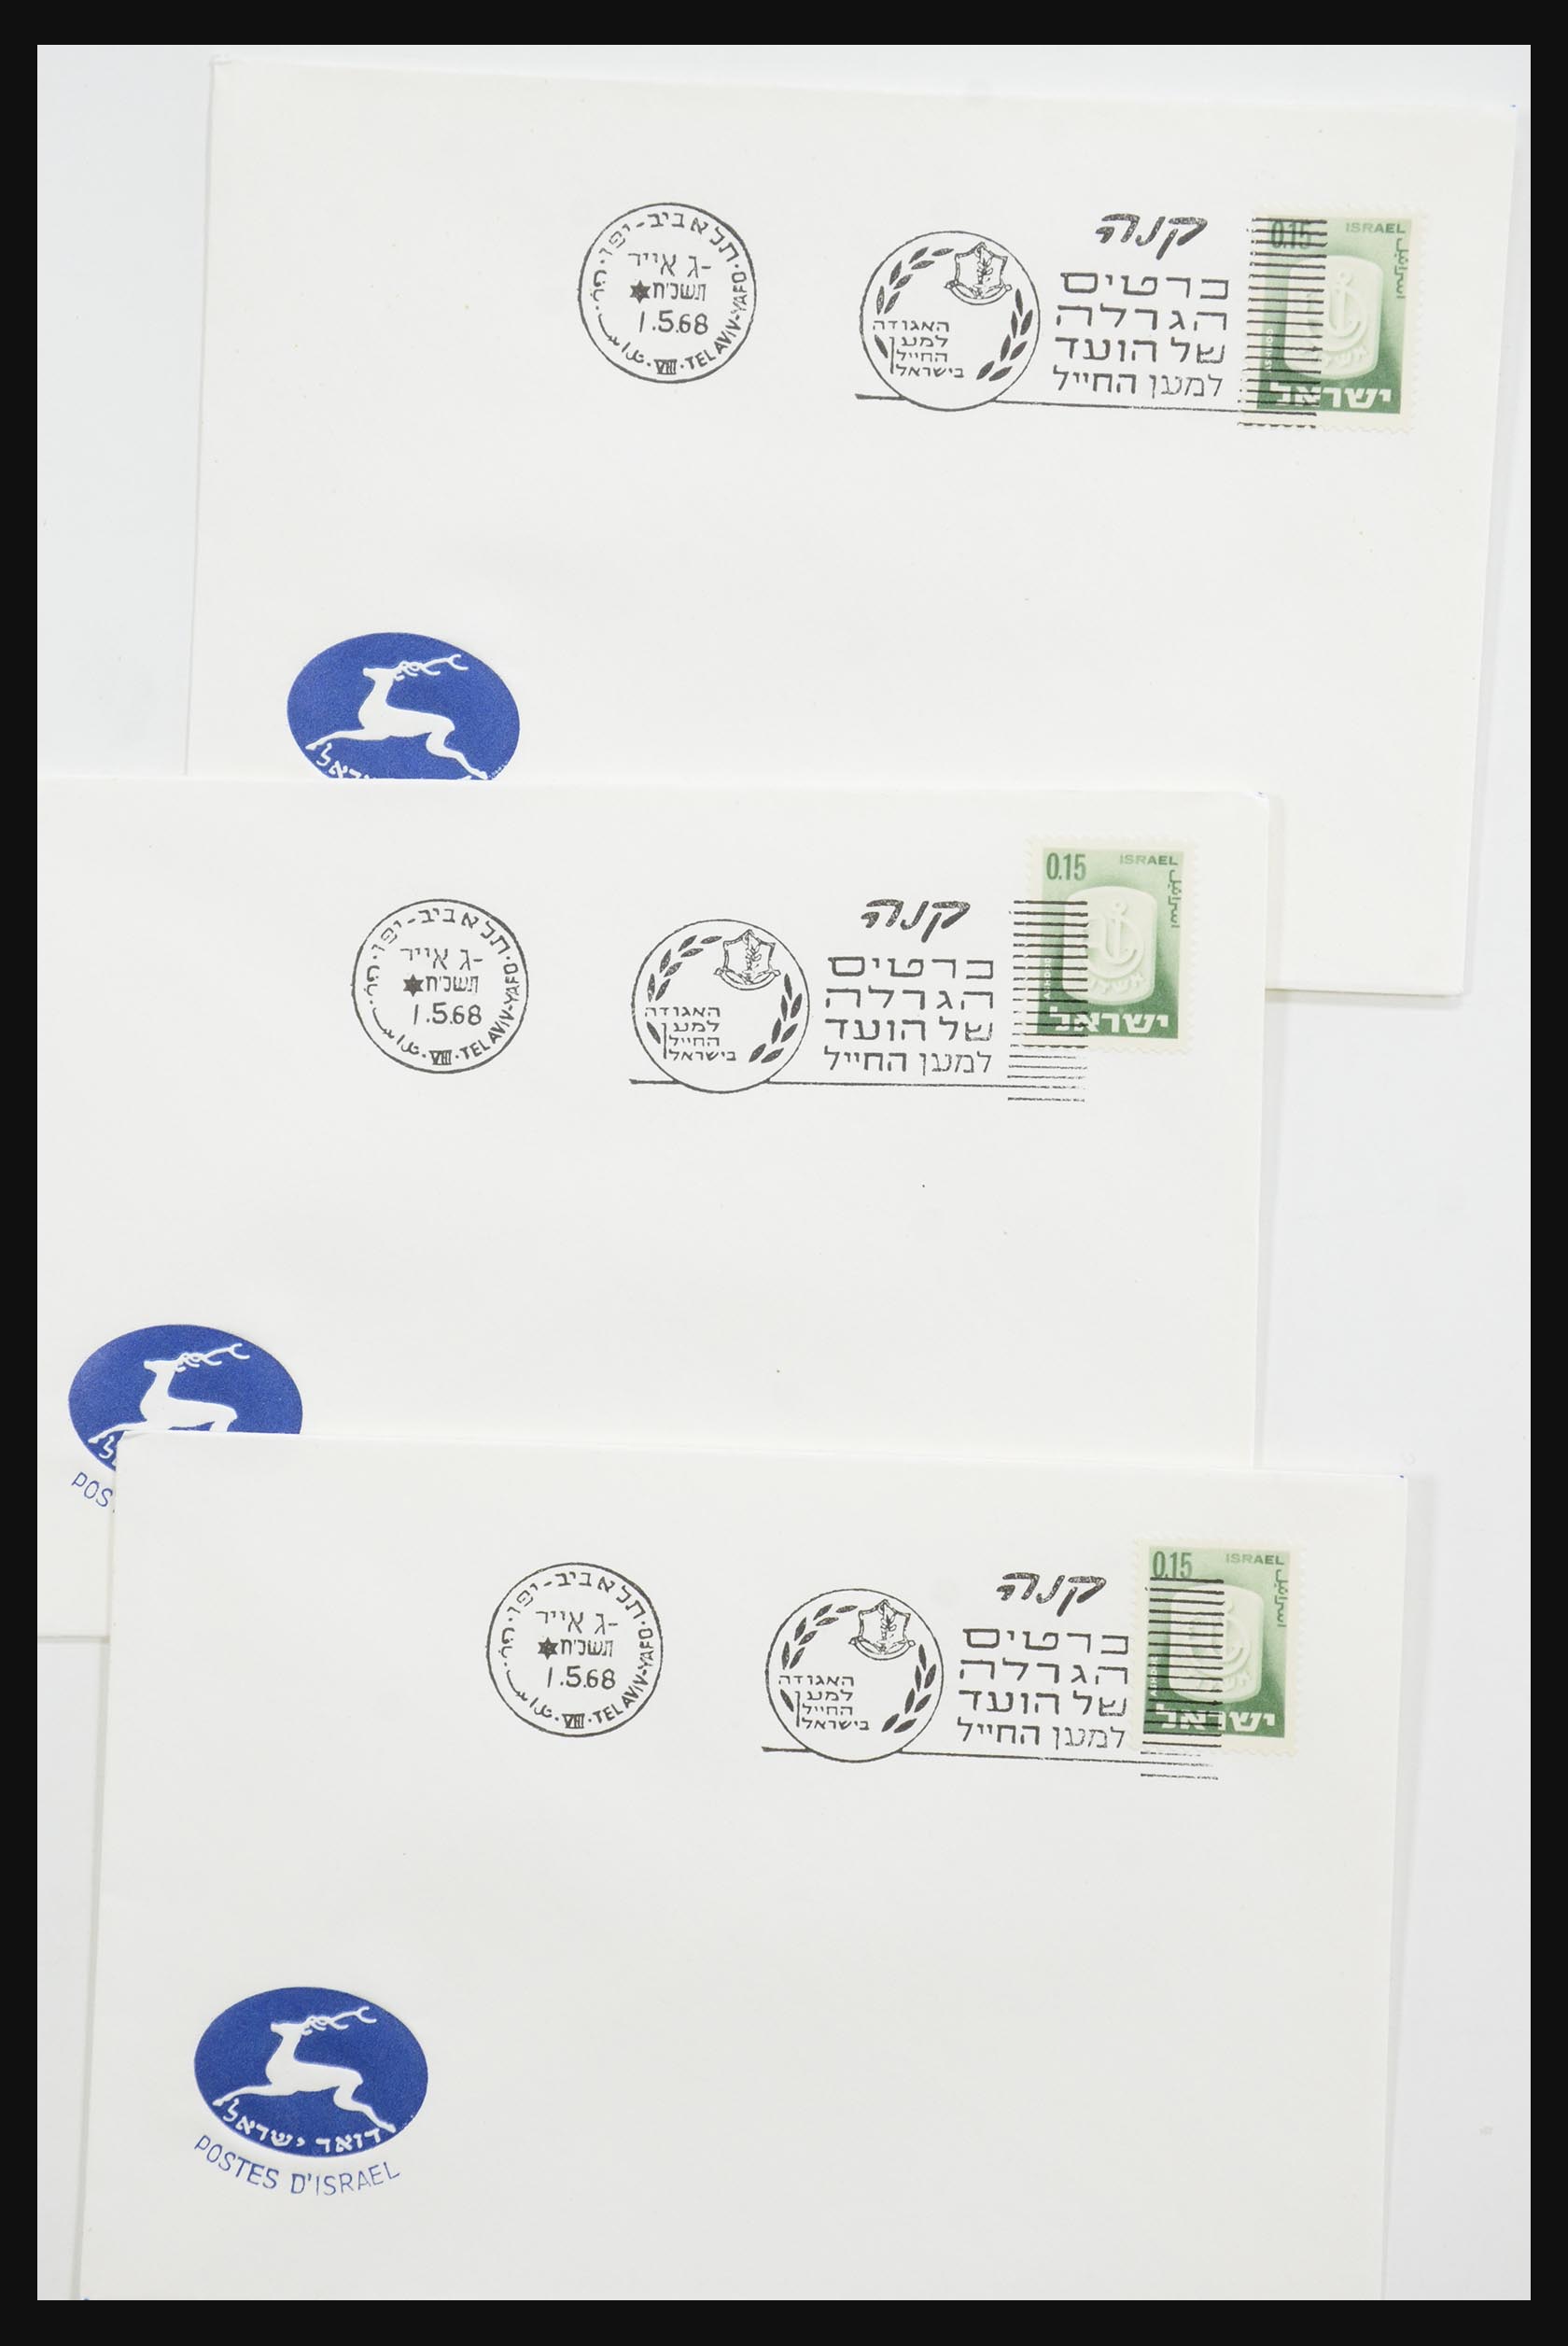 31924 086 - 31924 Israel first day cover collection 1957-2003.